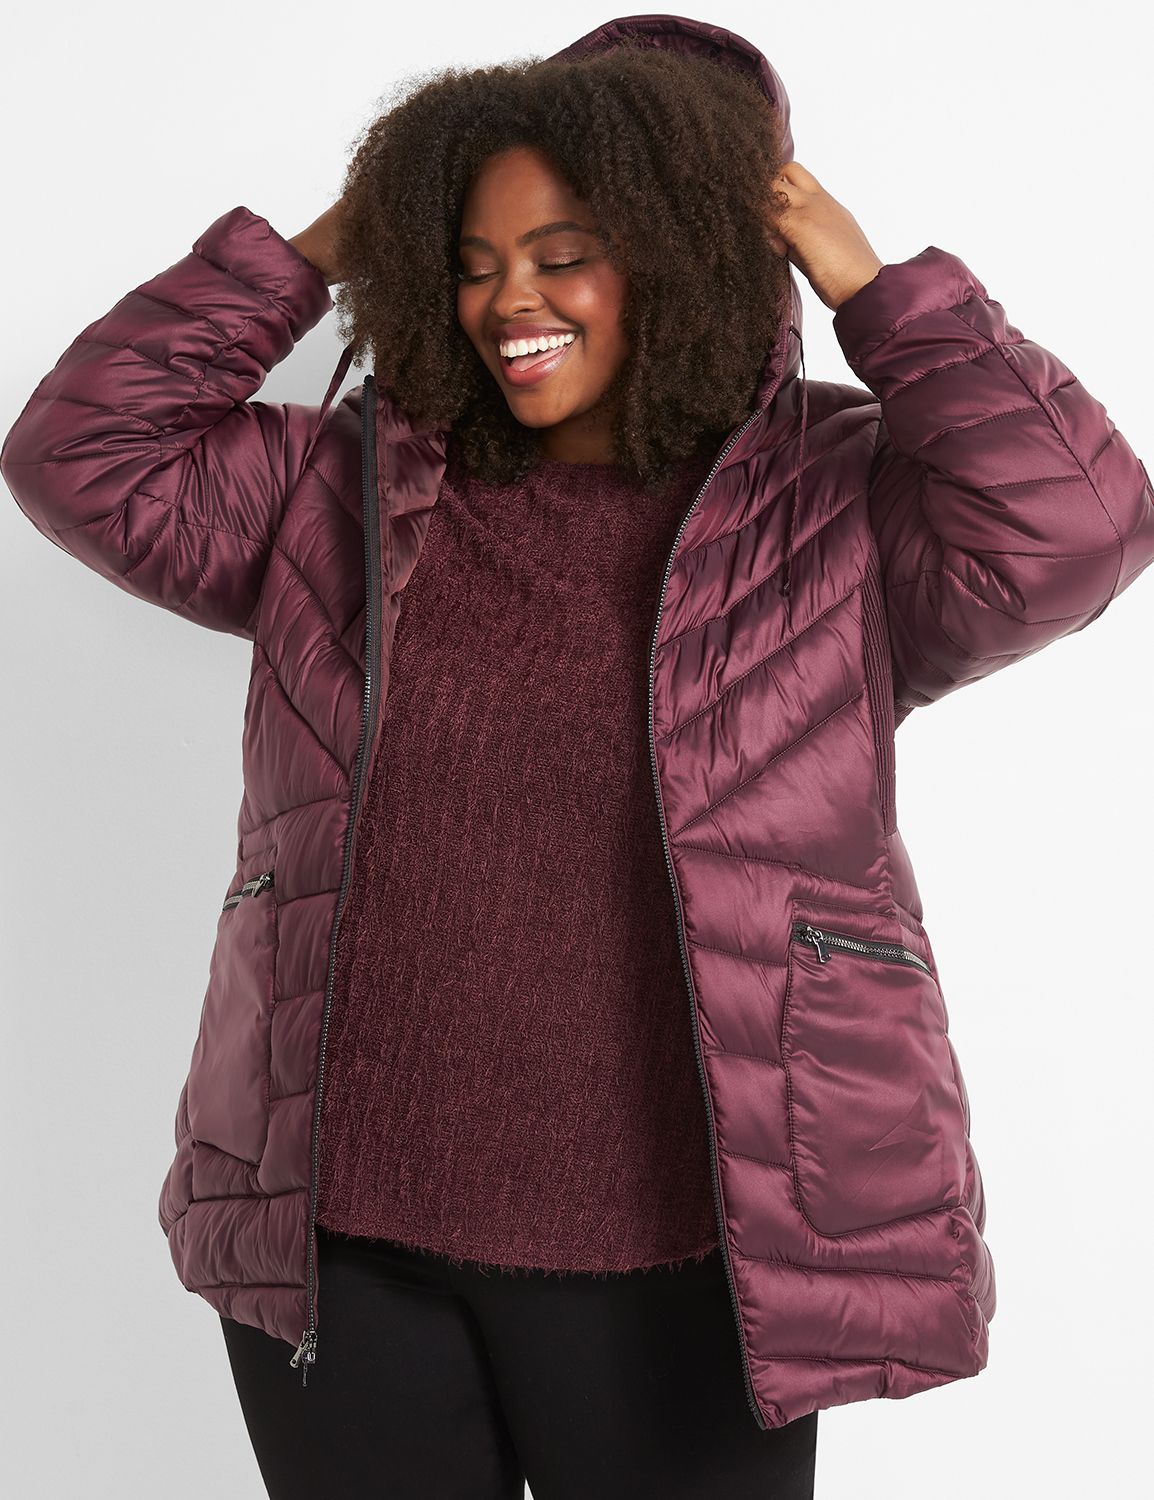 Size Women's Coats: Leather, Puffers Wraps | Lane Bryant